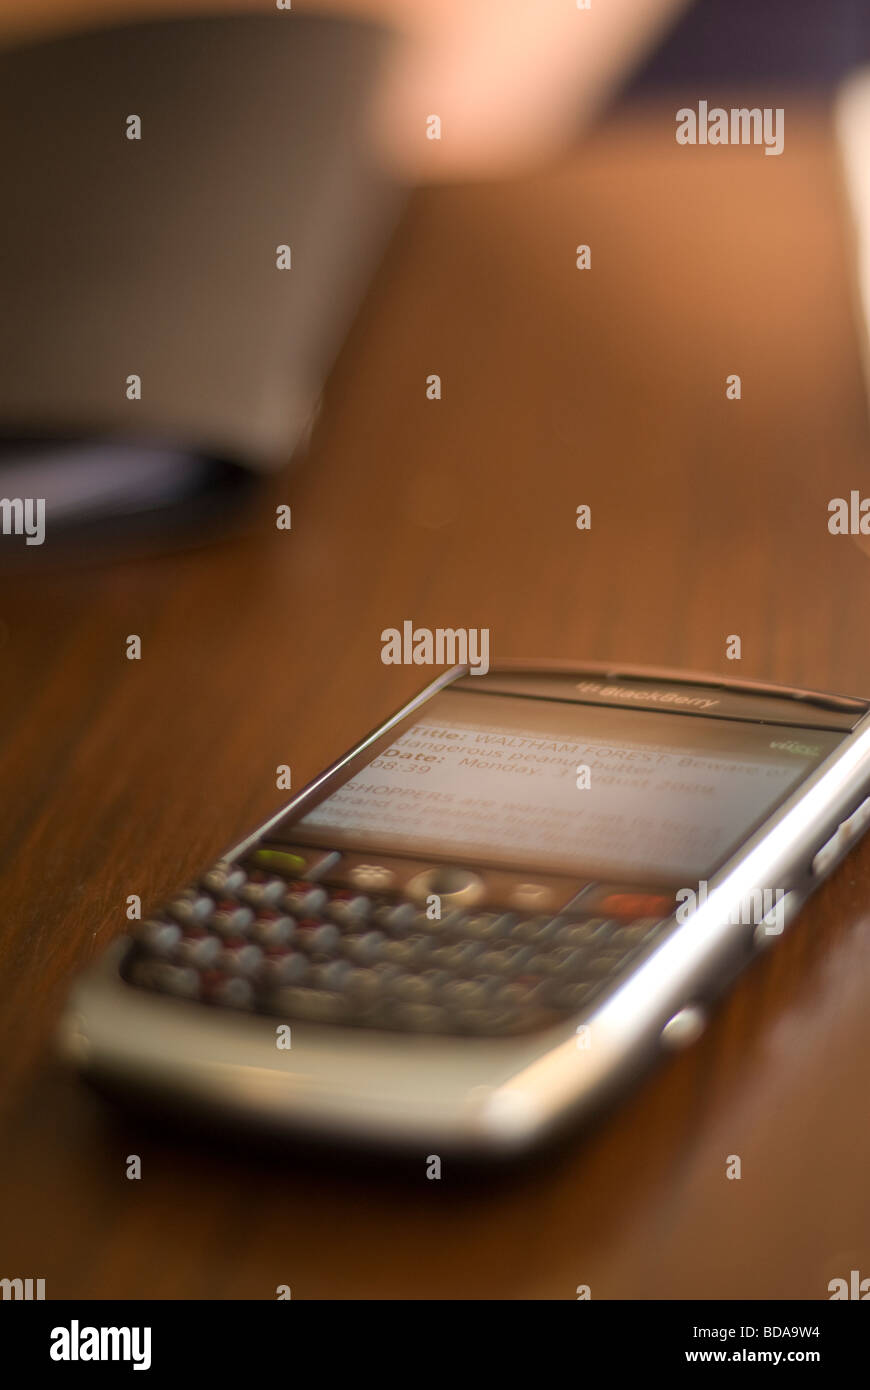 Blackberry on a table Stock Photo